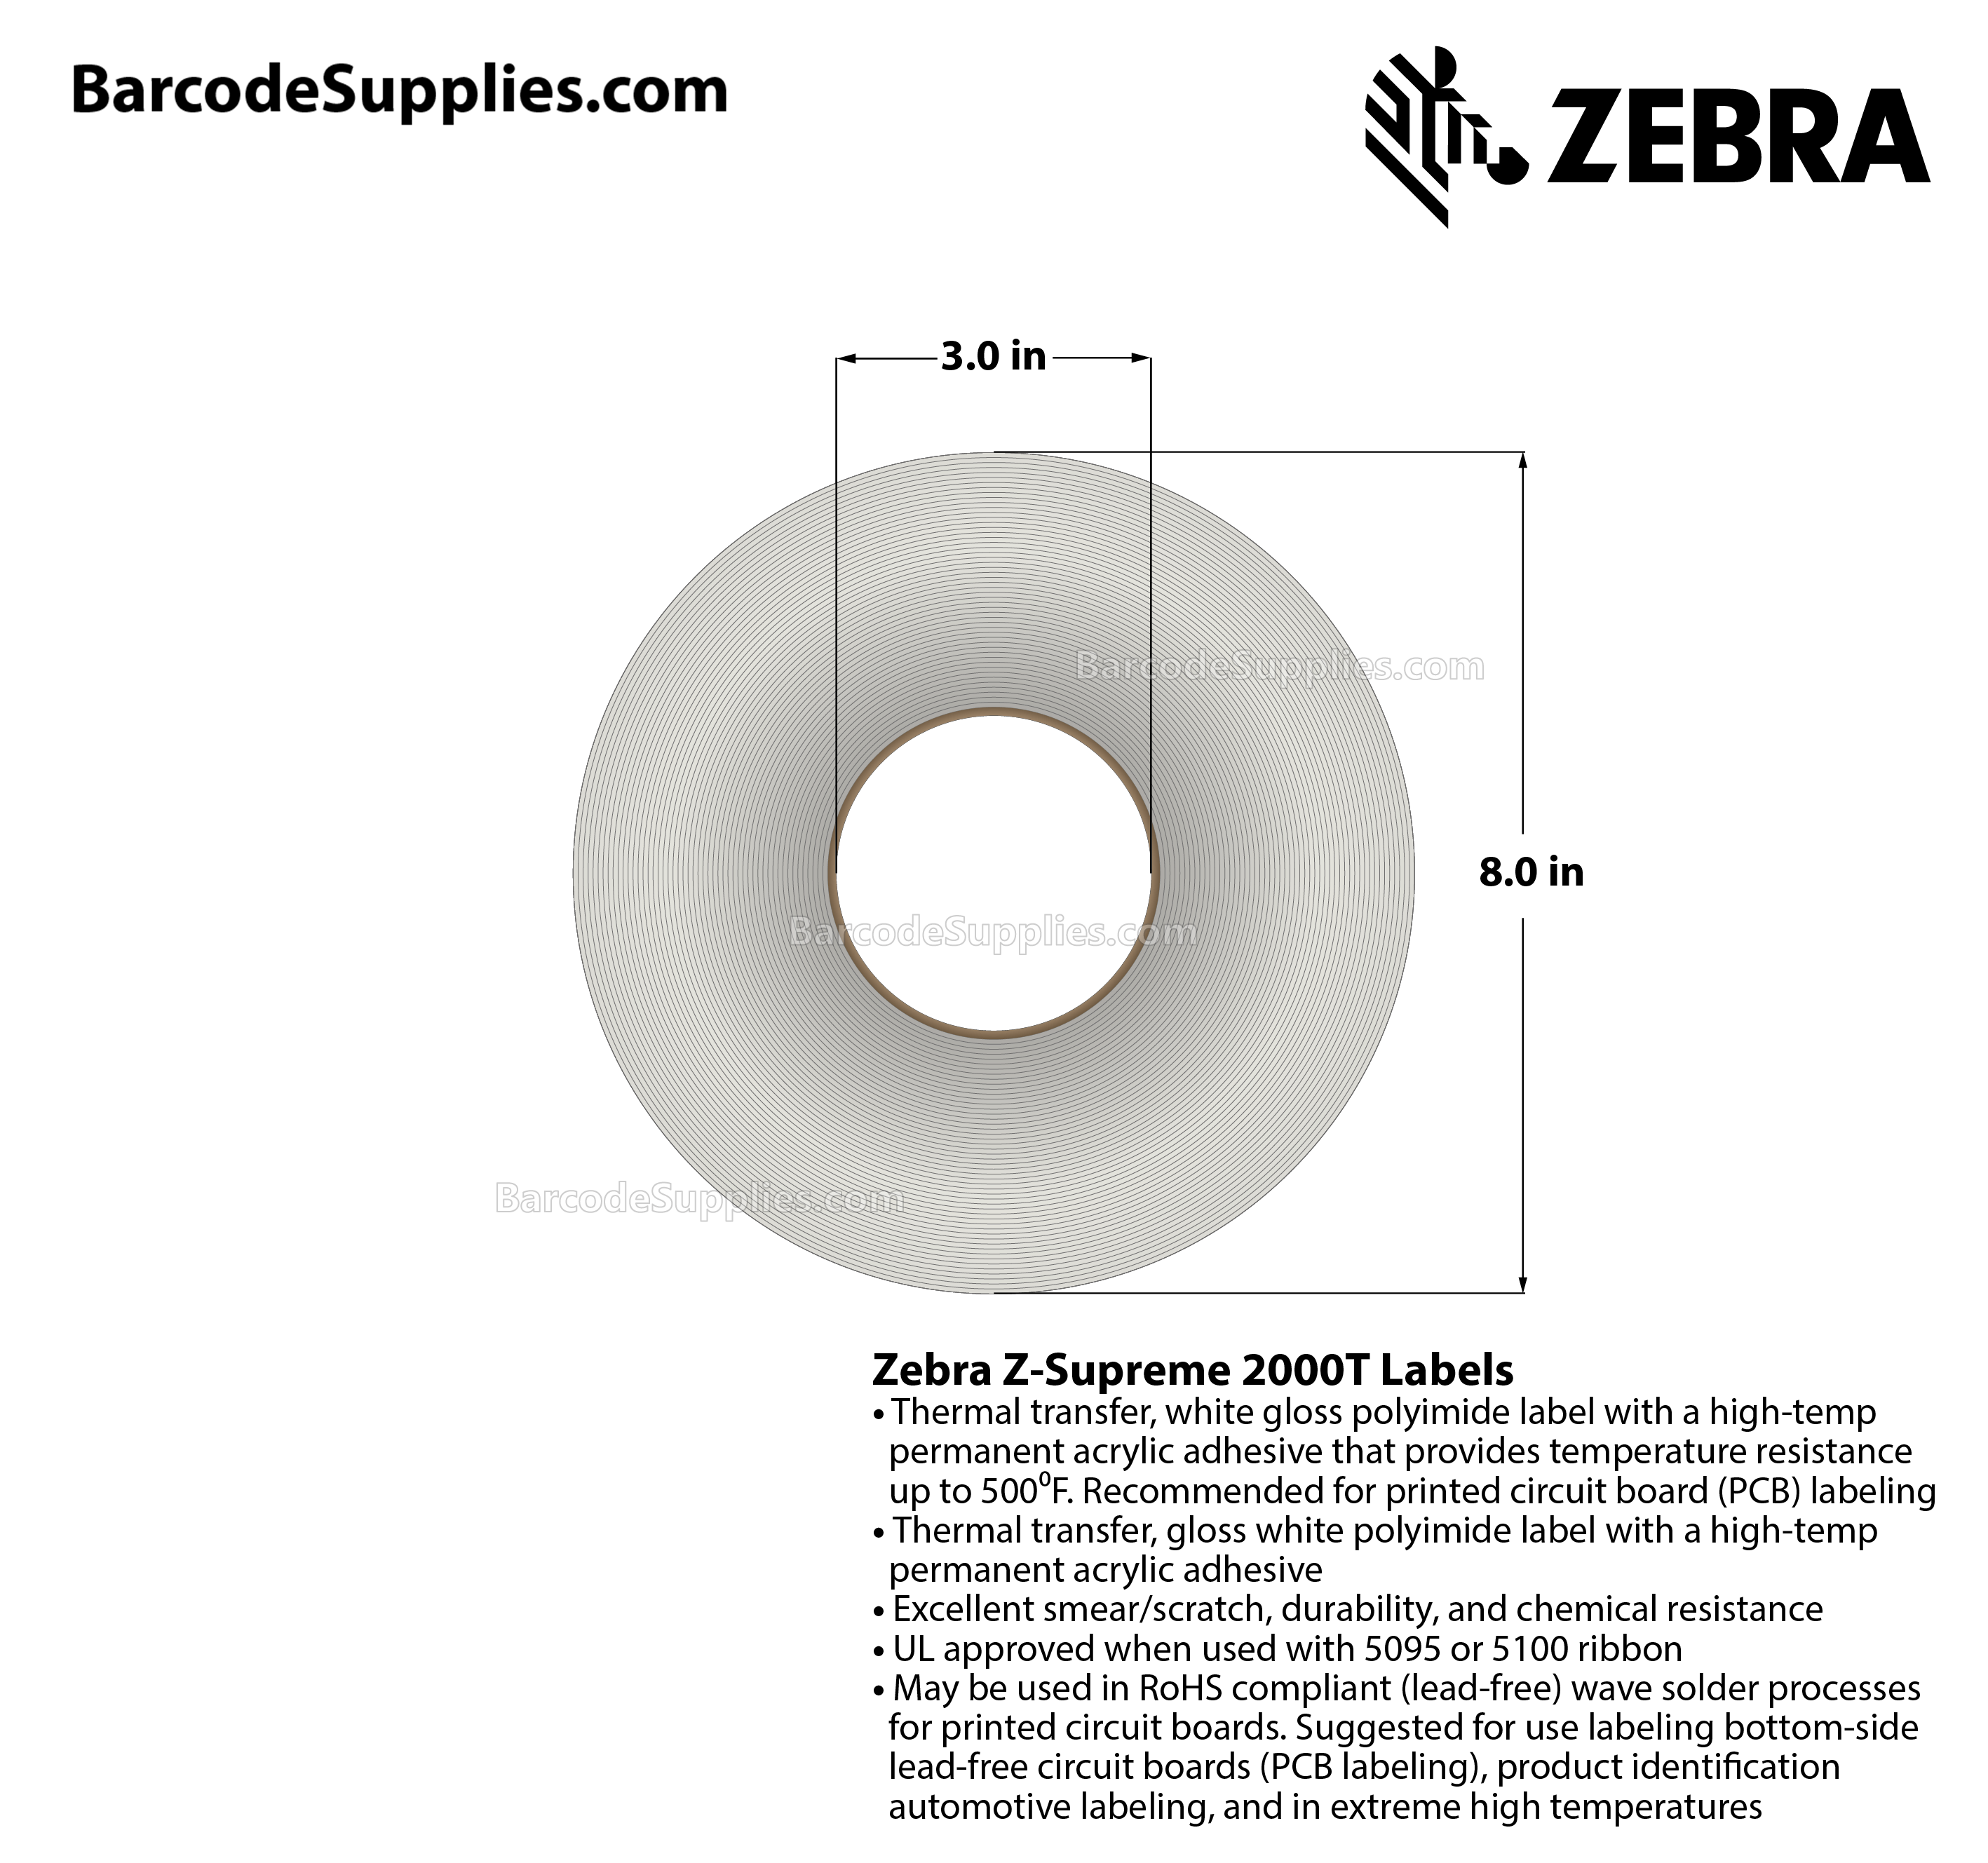 1.5 x 0.5 Thermal Transfer White Z-Supreme 2000T (2-Across) Labels With High-temp Adhesive - Perforated - 10000 Labels Per Roll - Carton Of 1 Rolls - 10000 Labels Total - MPN: 10023210